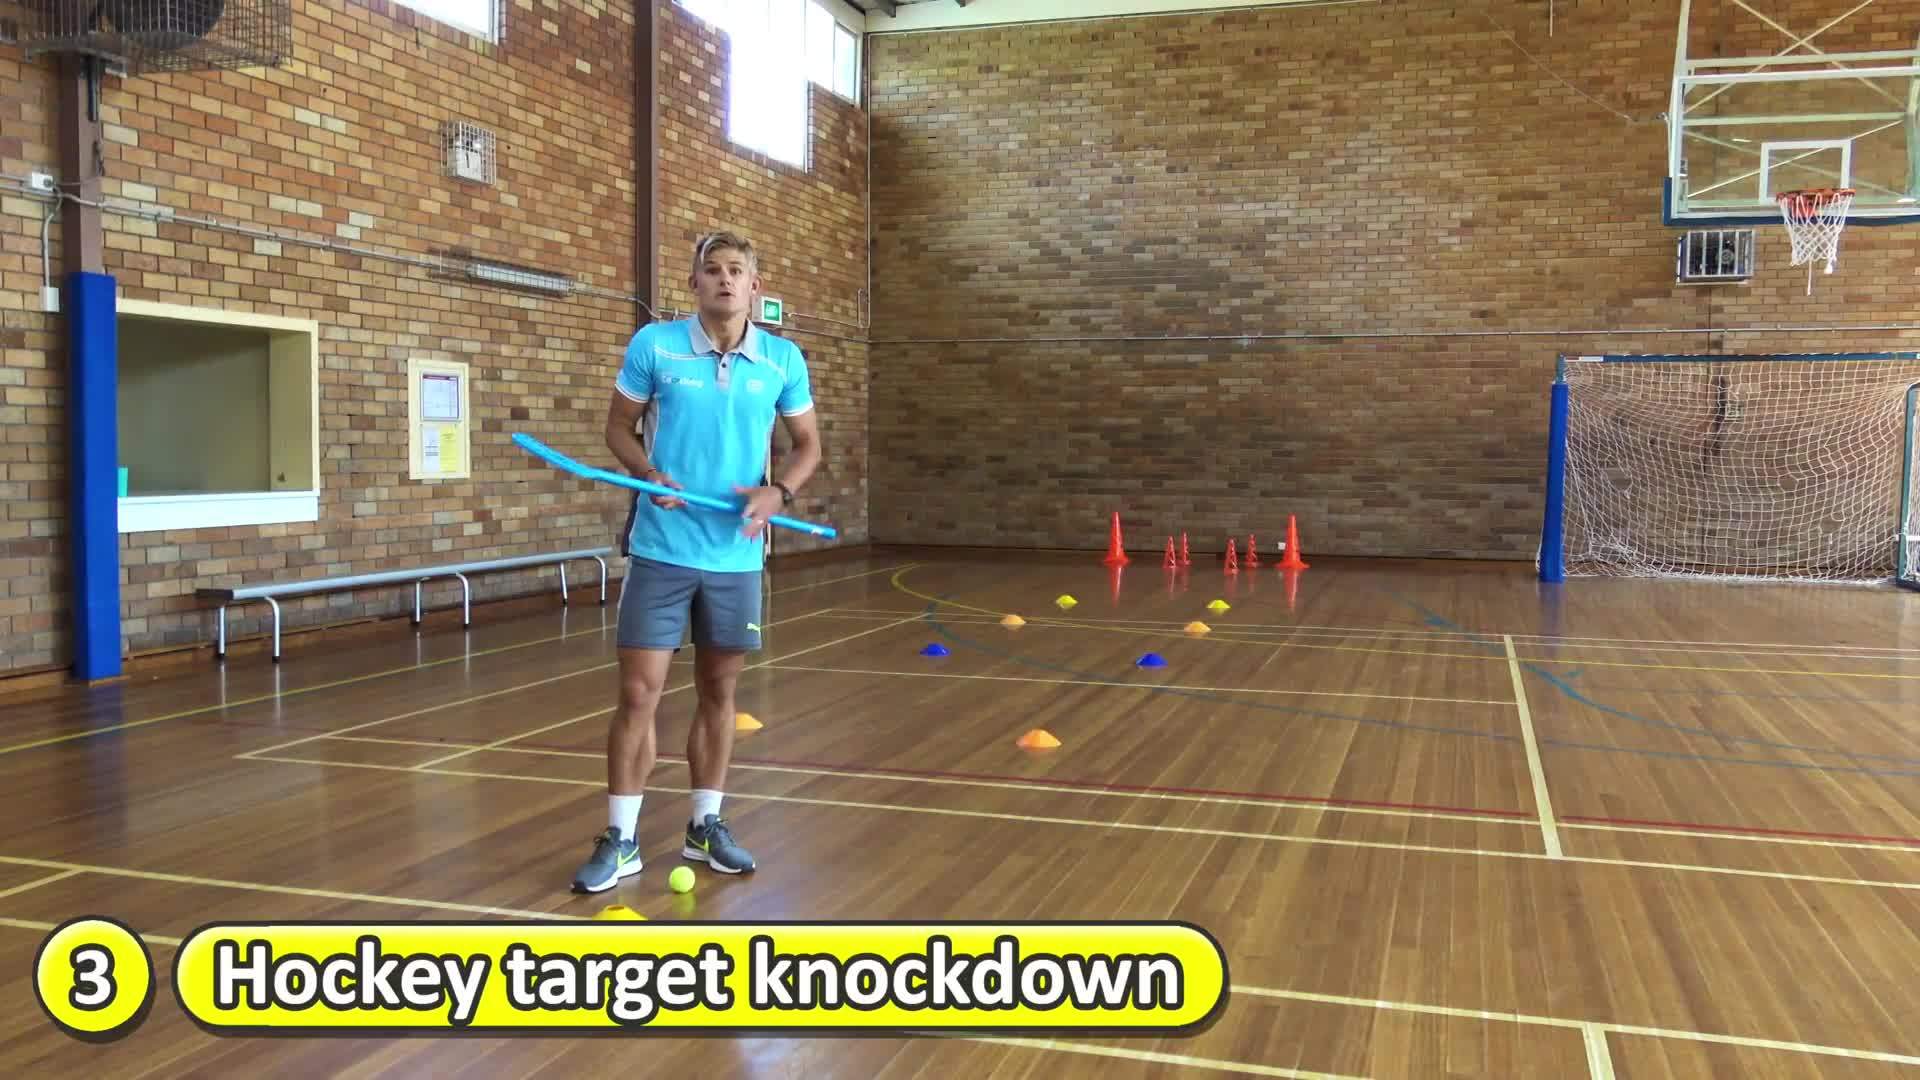 Relay race: Soccer/kicking › Around the tall cone | Teaching fundamentals of PE (K-3)